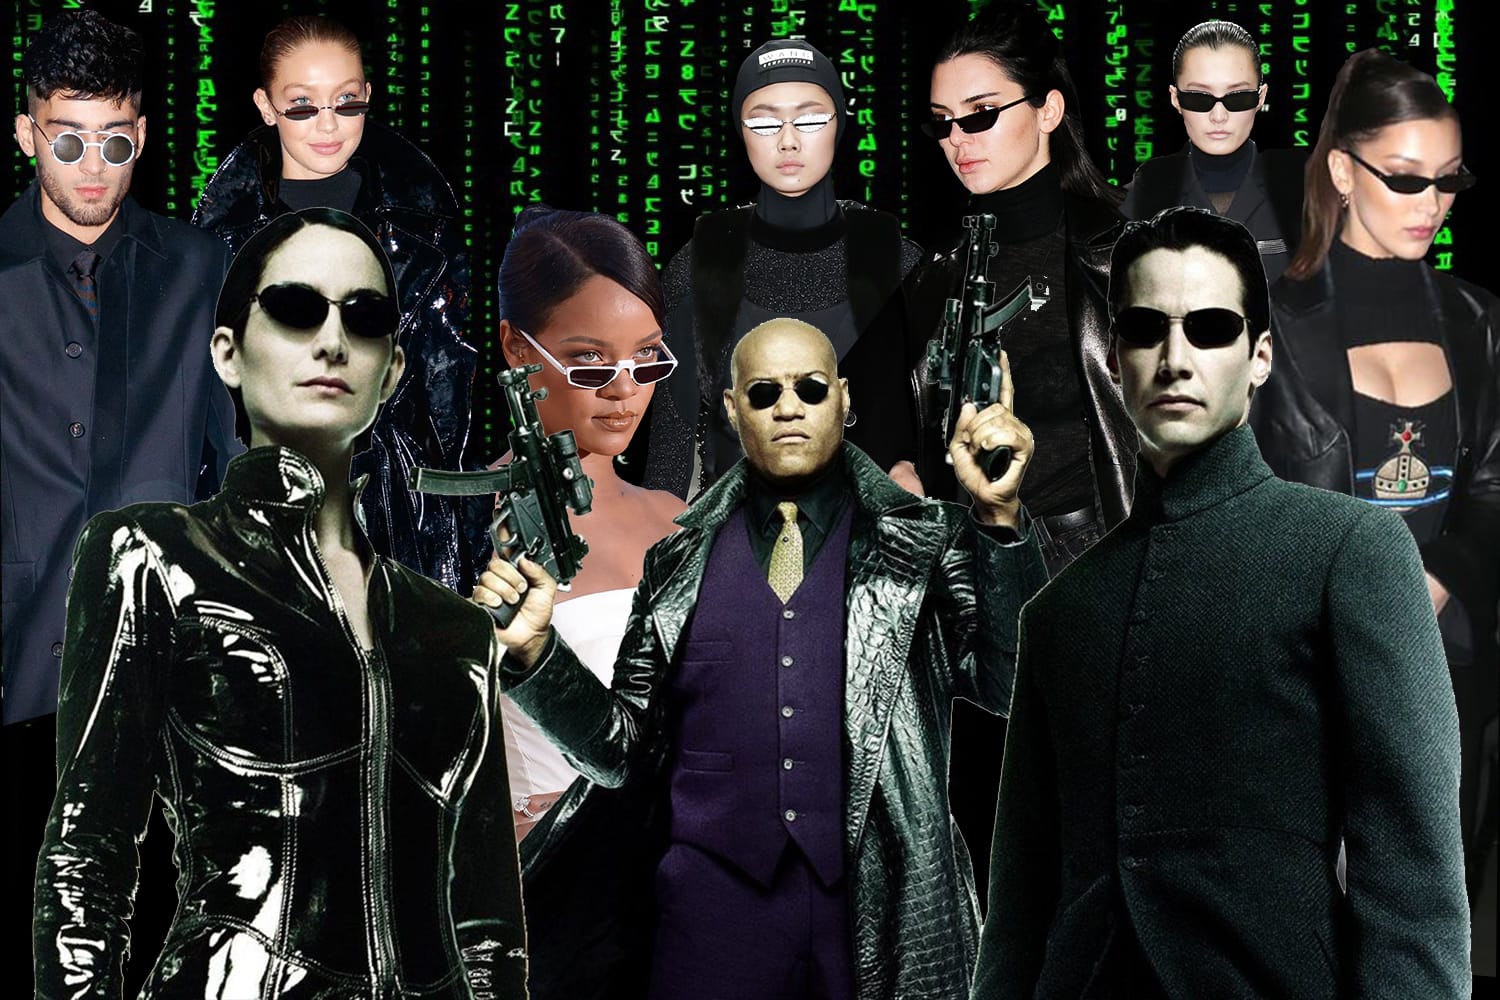 AnanyaDesigns Movie The Matrix Reloaded The Matrix Wall Poster Paper Print  - Movies posters in India - Buy art, film, design, movie, music, nature and  educational paintings/wallpapers at Flipkart.com